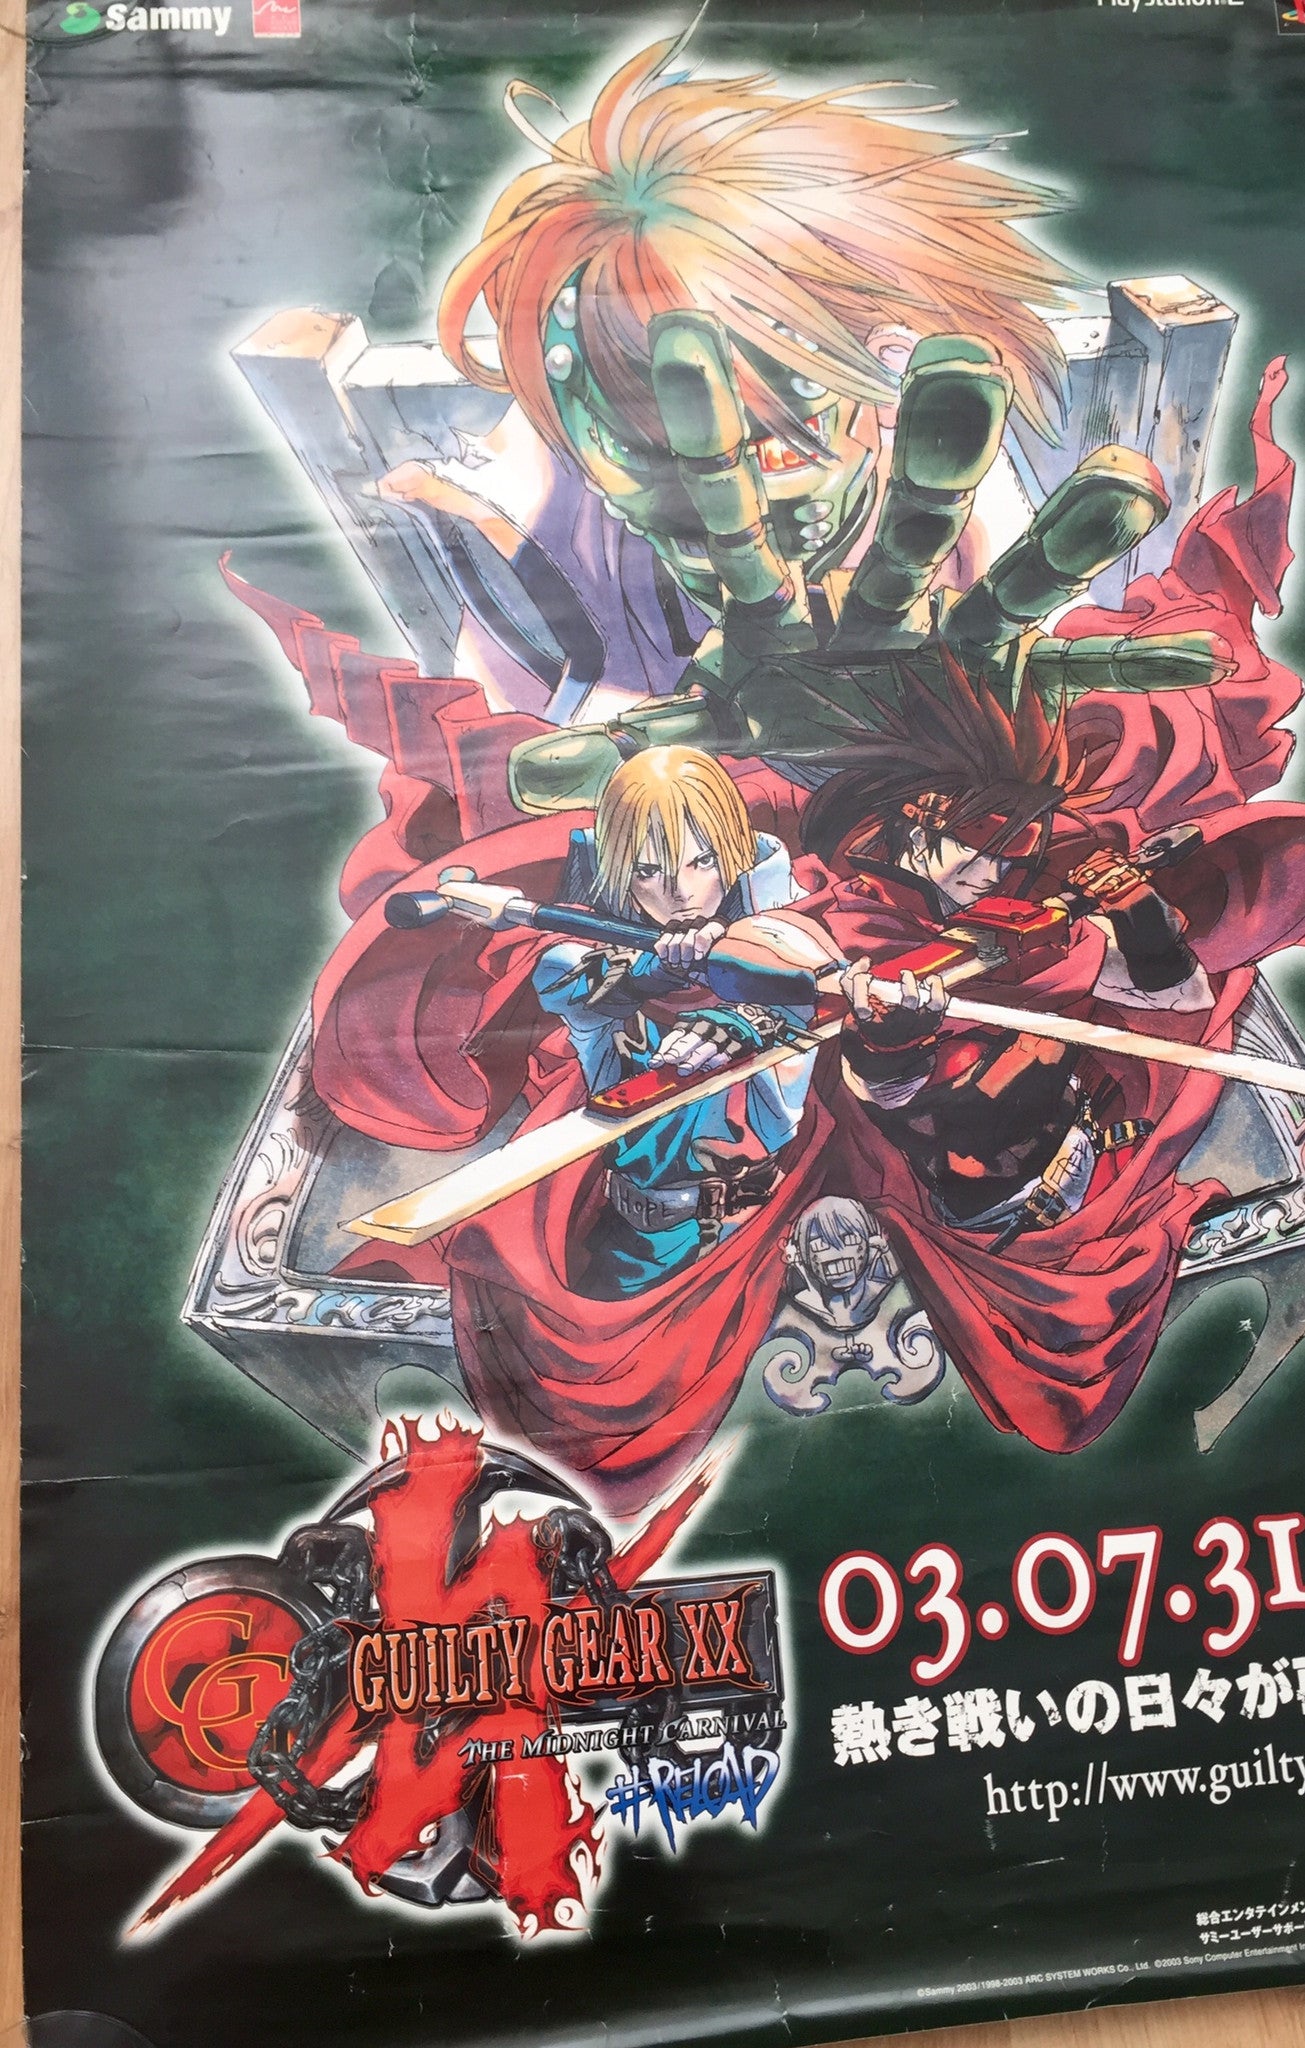 Guilty Gear XX (B2) Japanese Promotional Poster